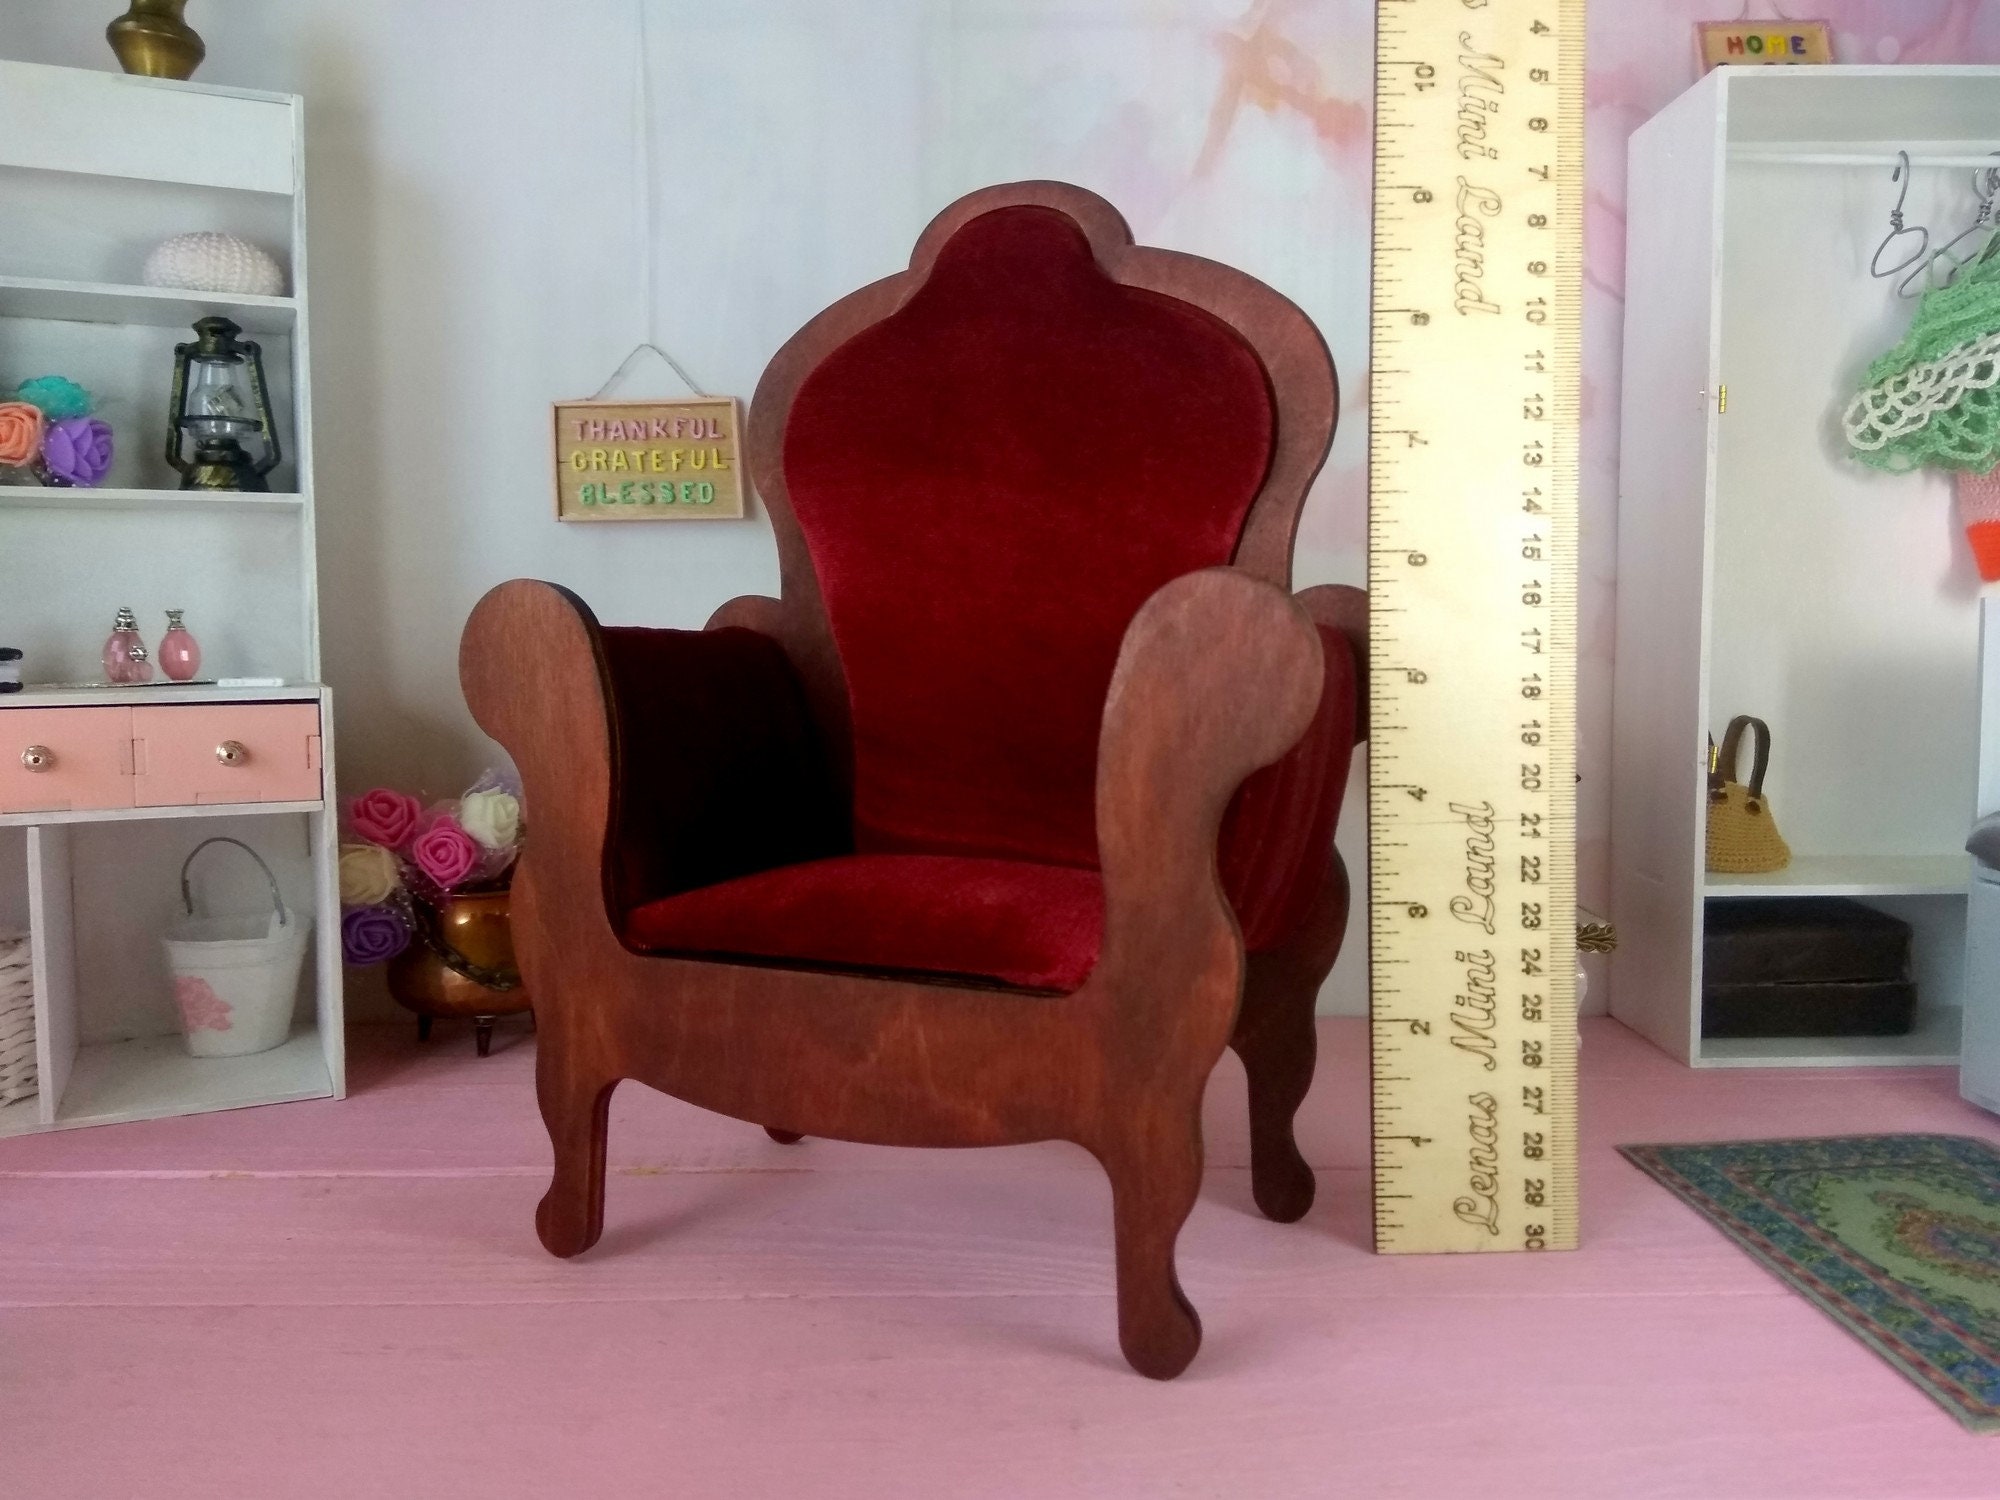 Gothic THRONE 1/6 1:6 scale doll furniture for IT FR Barbie wooden New 2019 